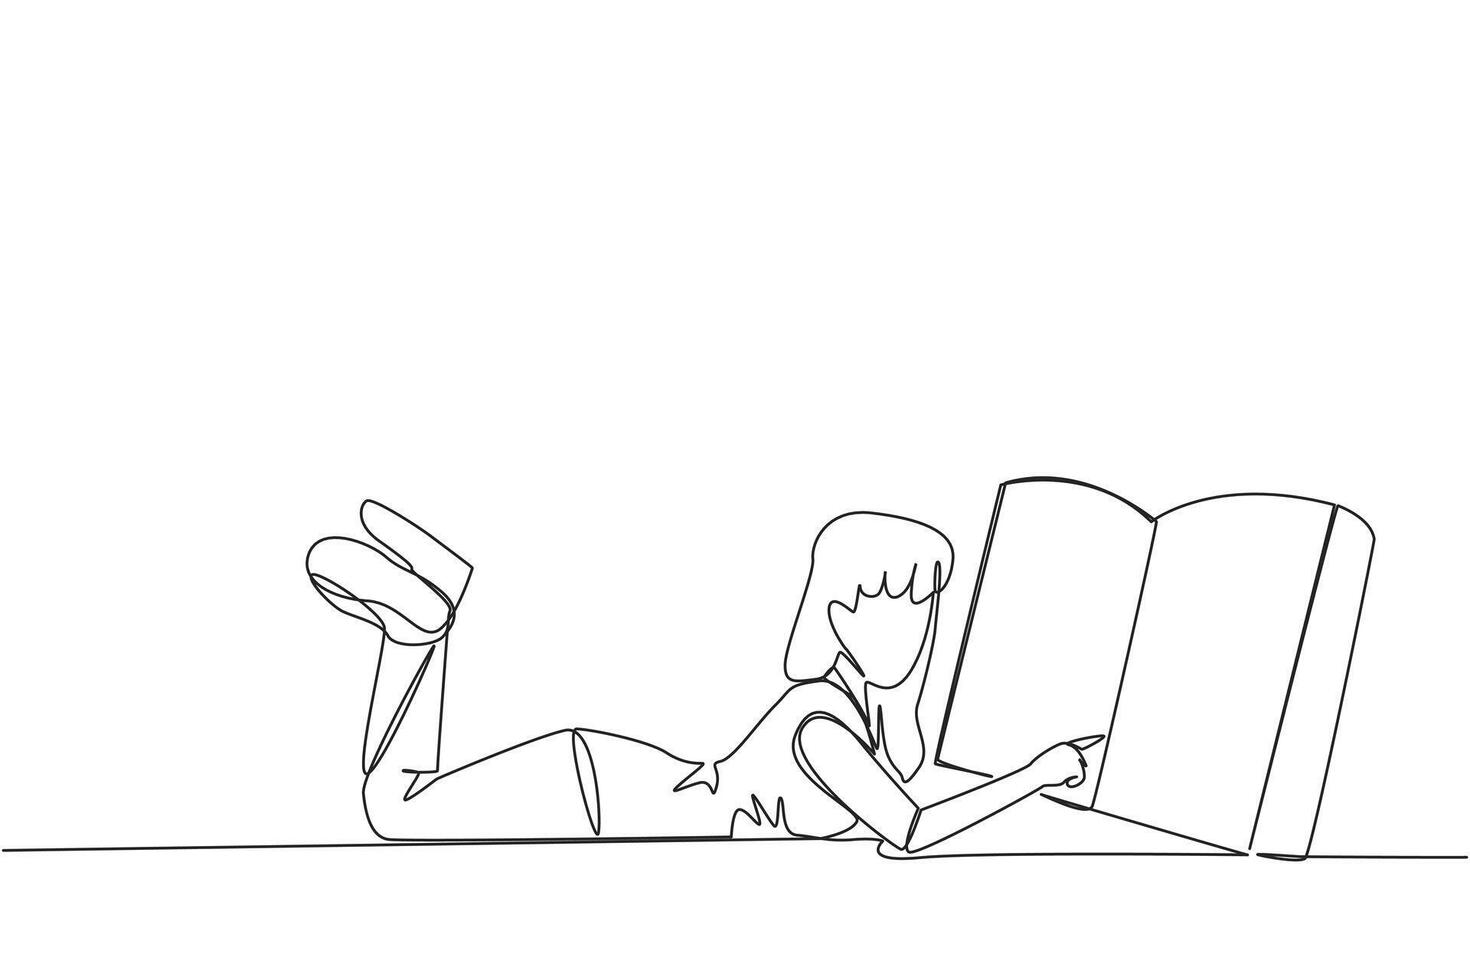 Single one line drawing woman lying on her stomach reading a big book. Enjoy reading books in a variety of styles. Reading increases insight. Love reading. Continuous line design graphic illustration vector